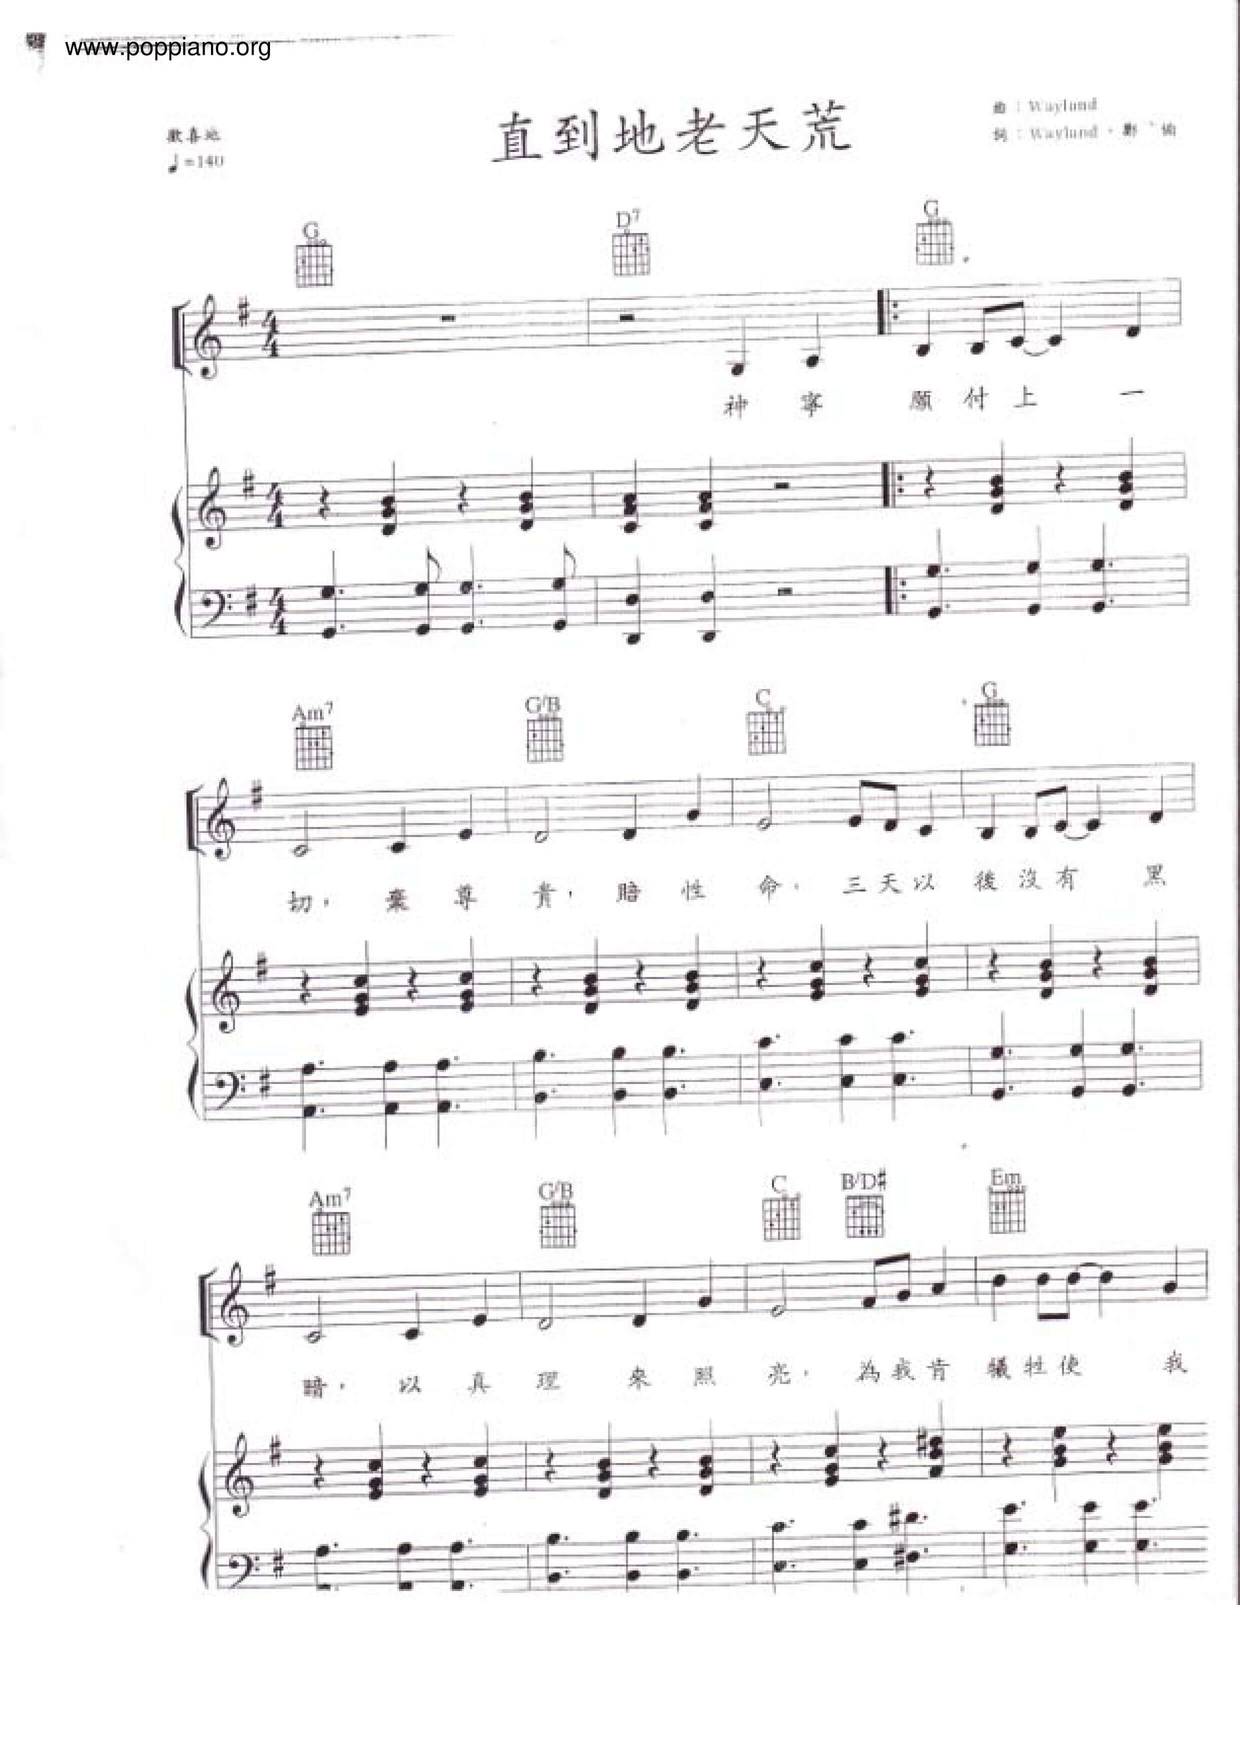 Find The Love That Was In The Beginning Score